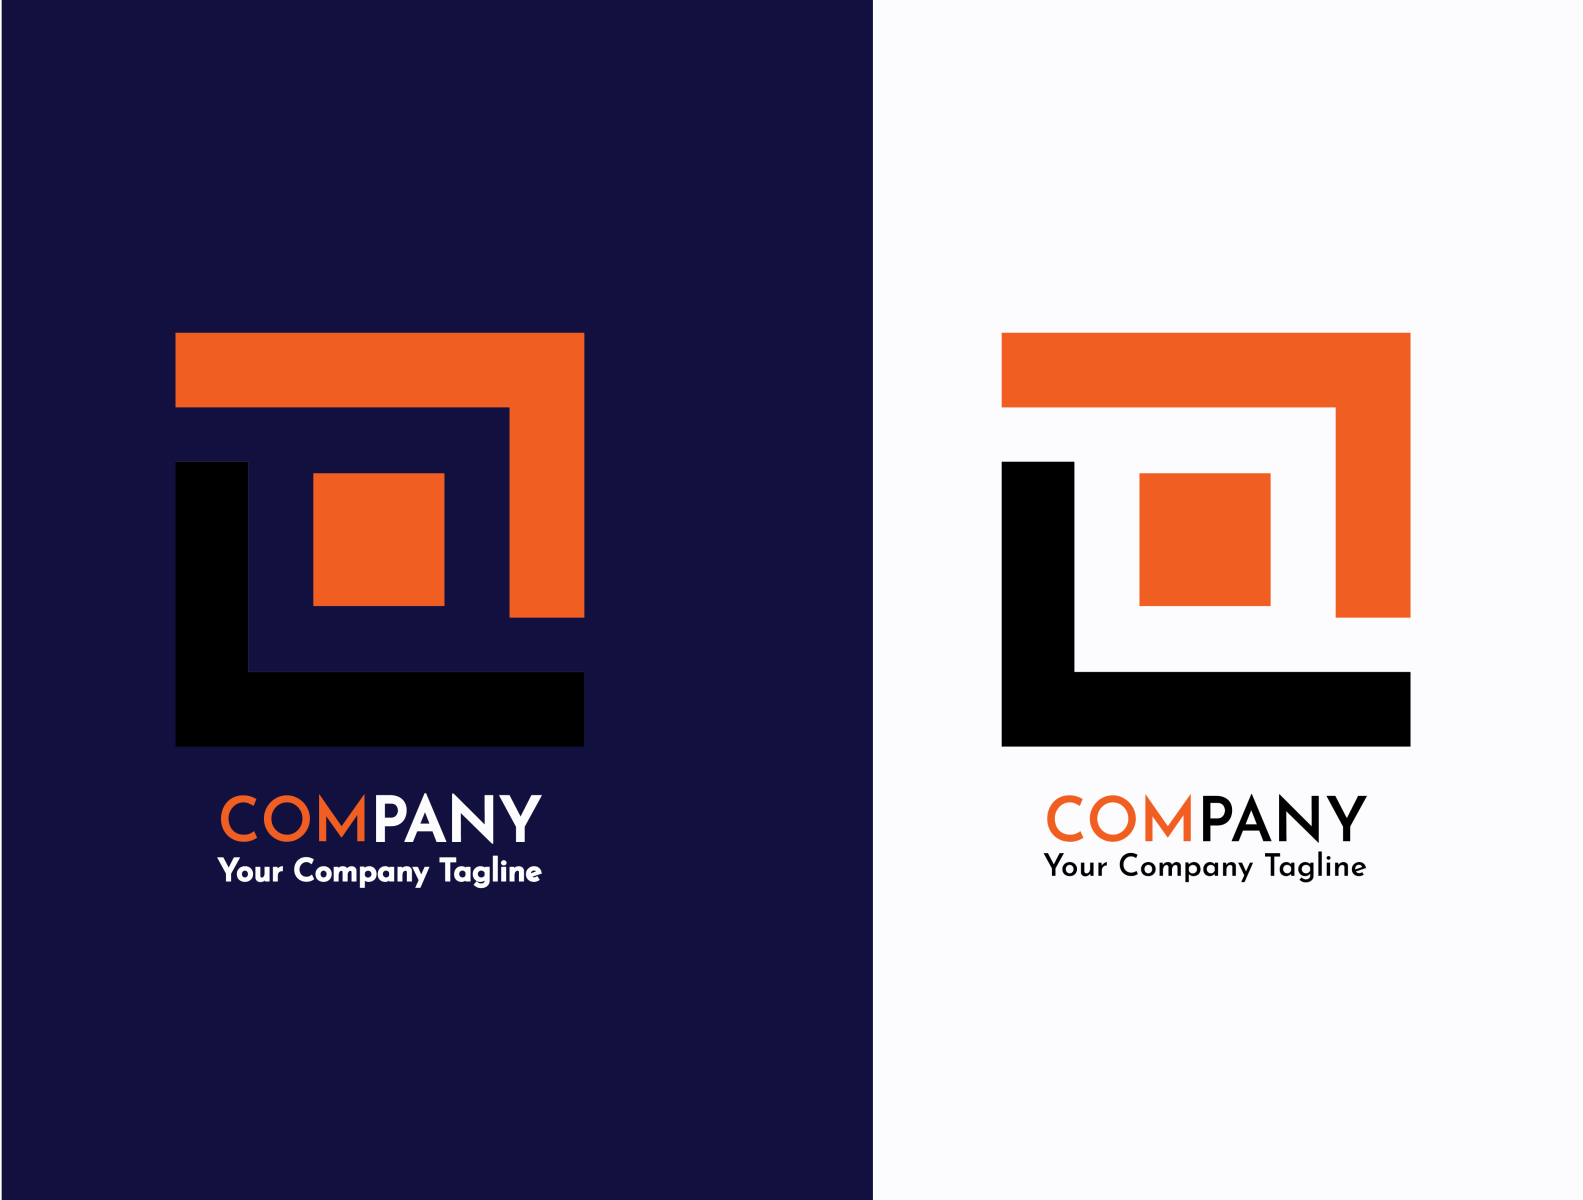 Business Logo by Wasif Khan on Dribbble